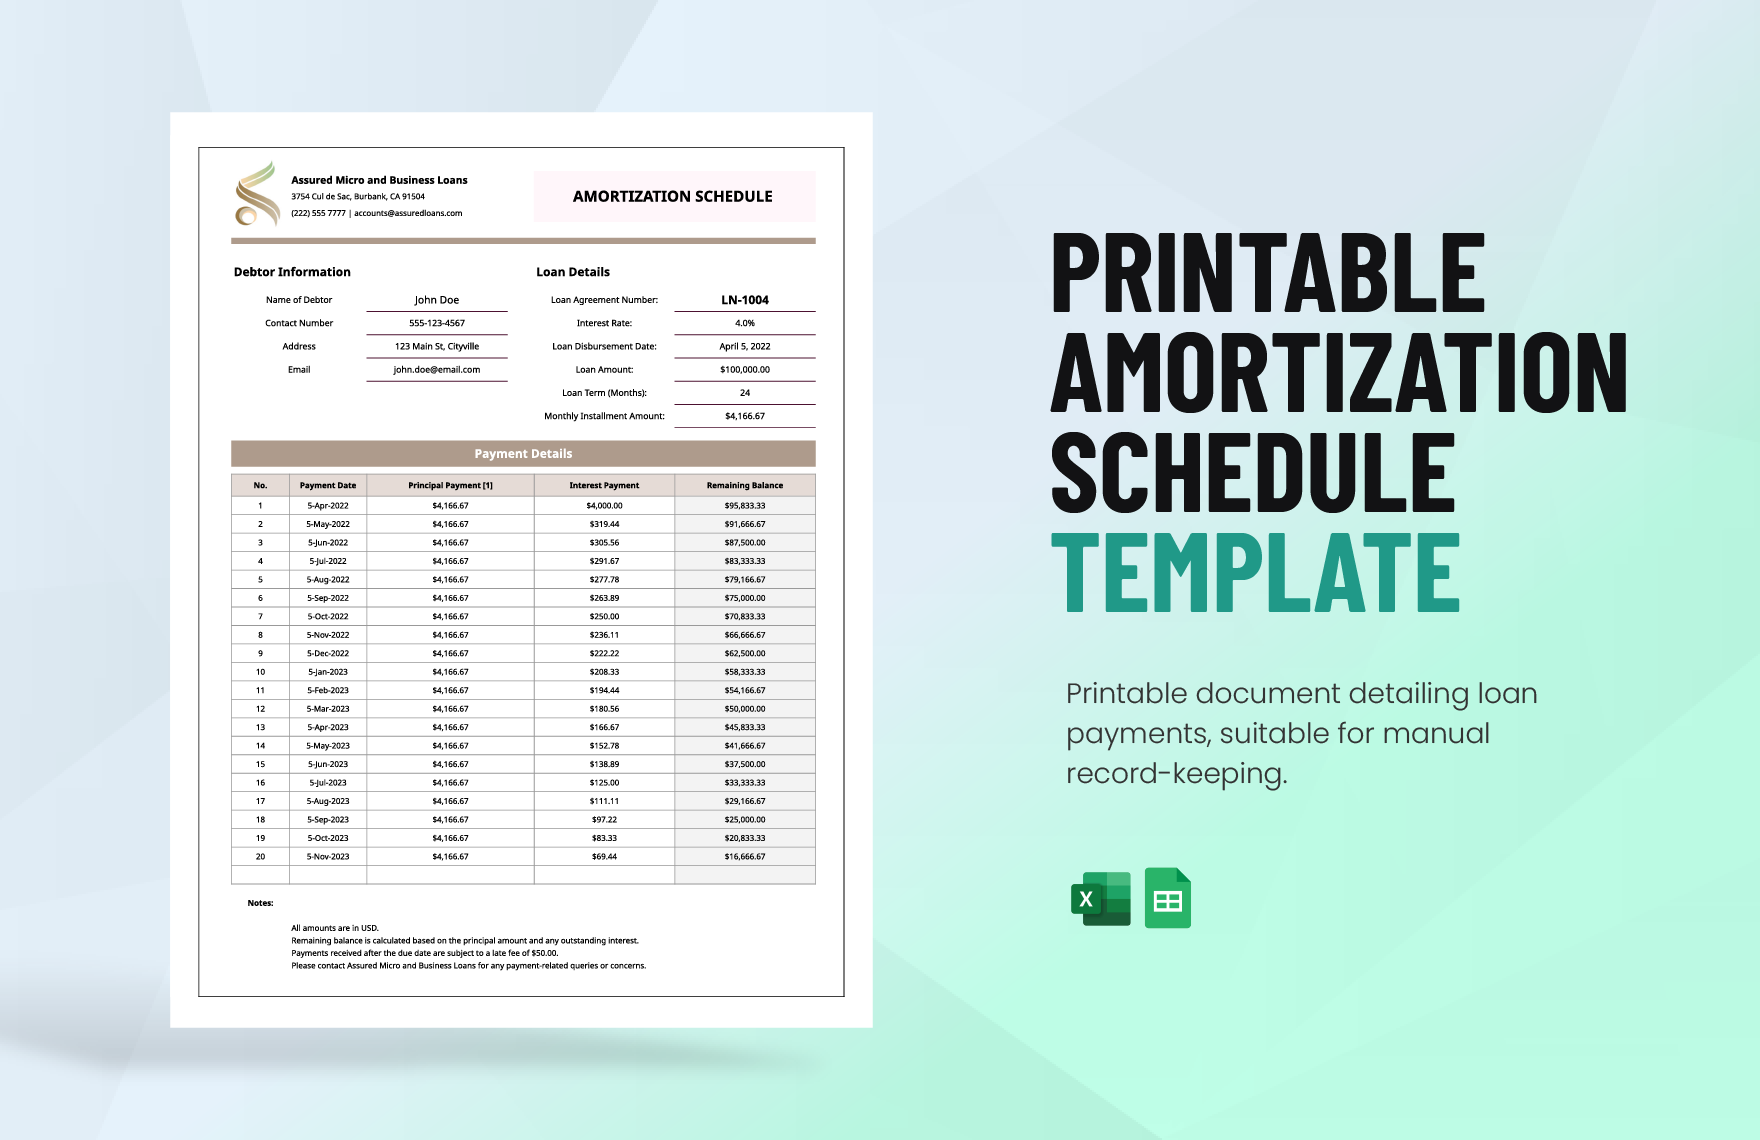 Printable Amortization Schedule Template in Excel, Google Sheets